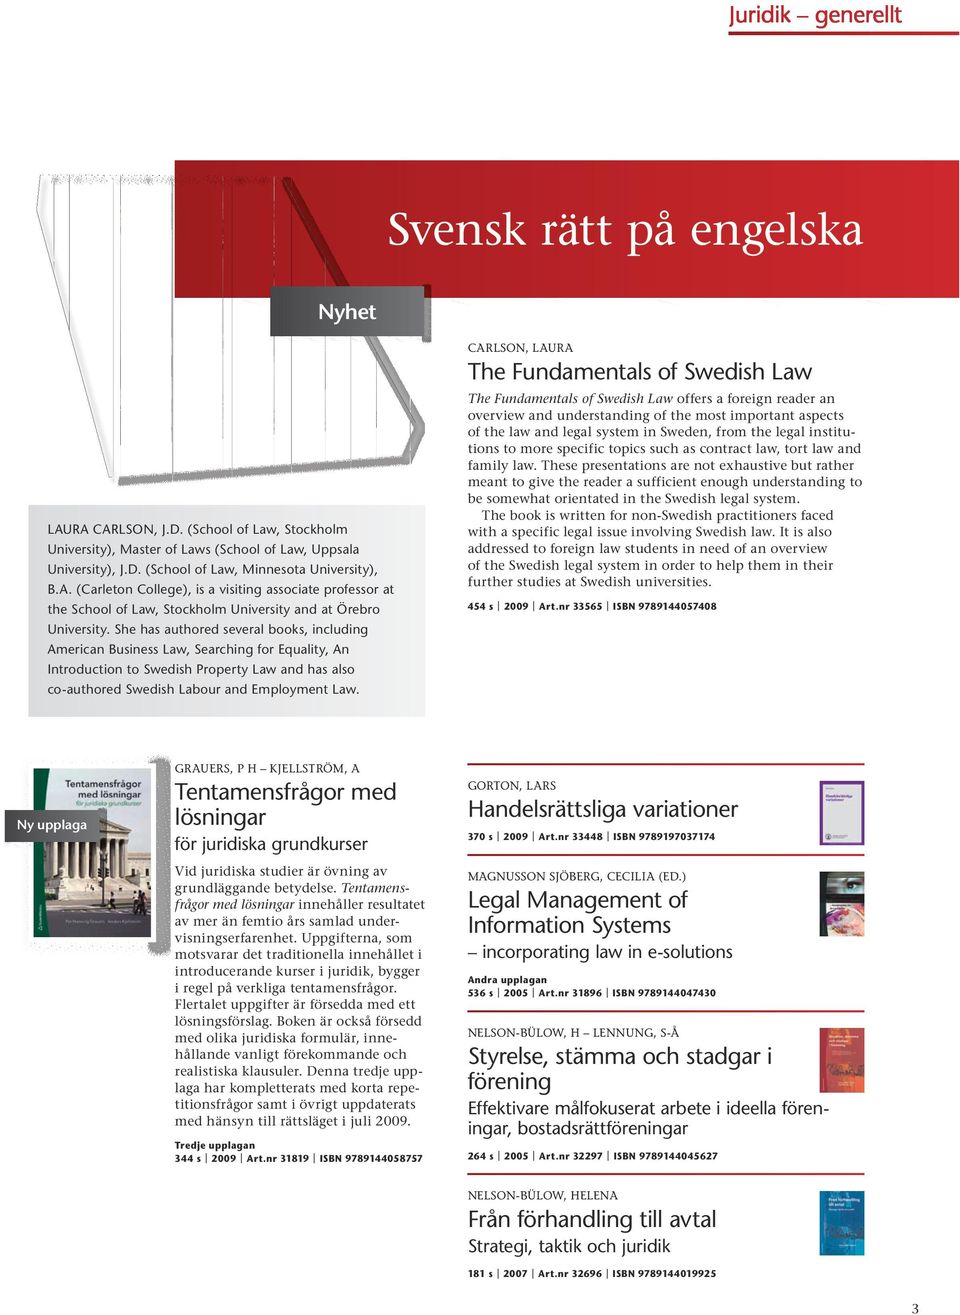 She has authored several books, including american Business Law, Searching for Equality, an Introduction to Swedish Property Law and has also co-authored Swedish Labour and Employment Law.